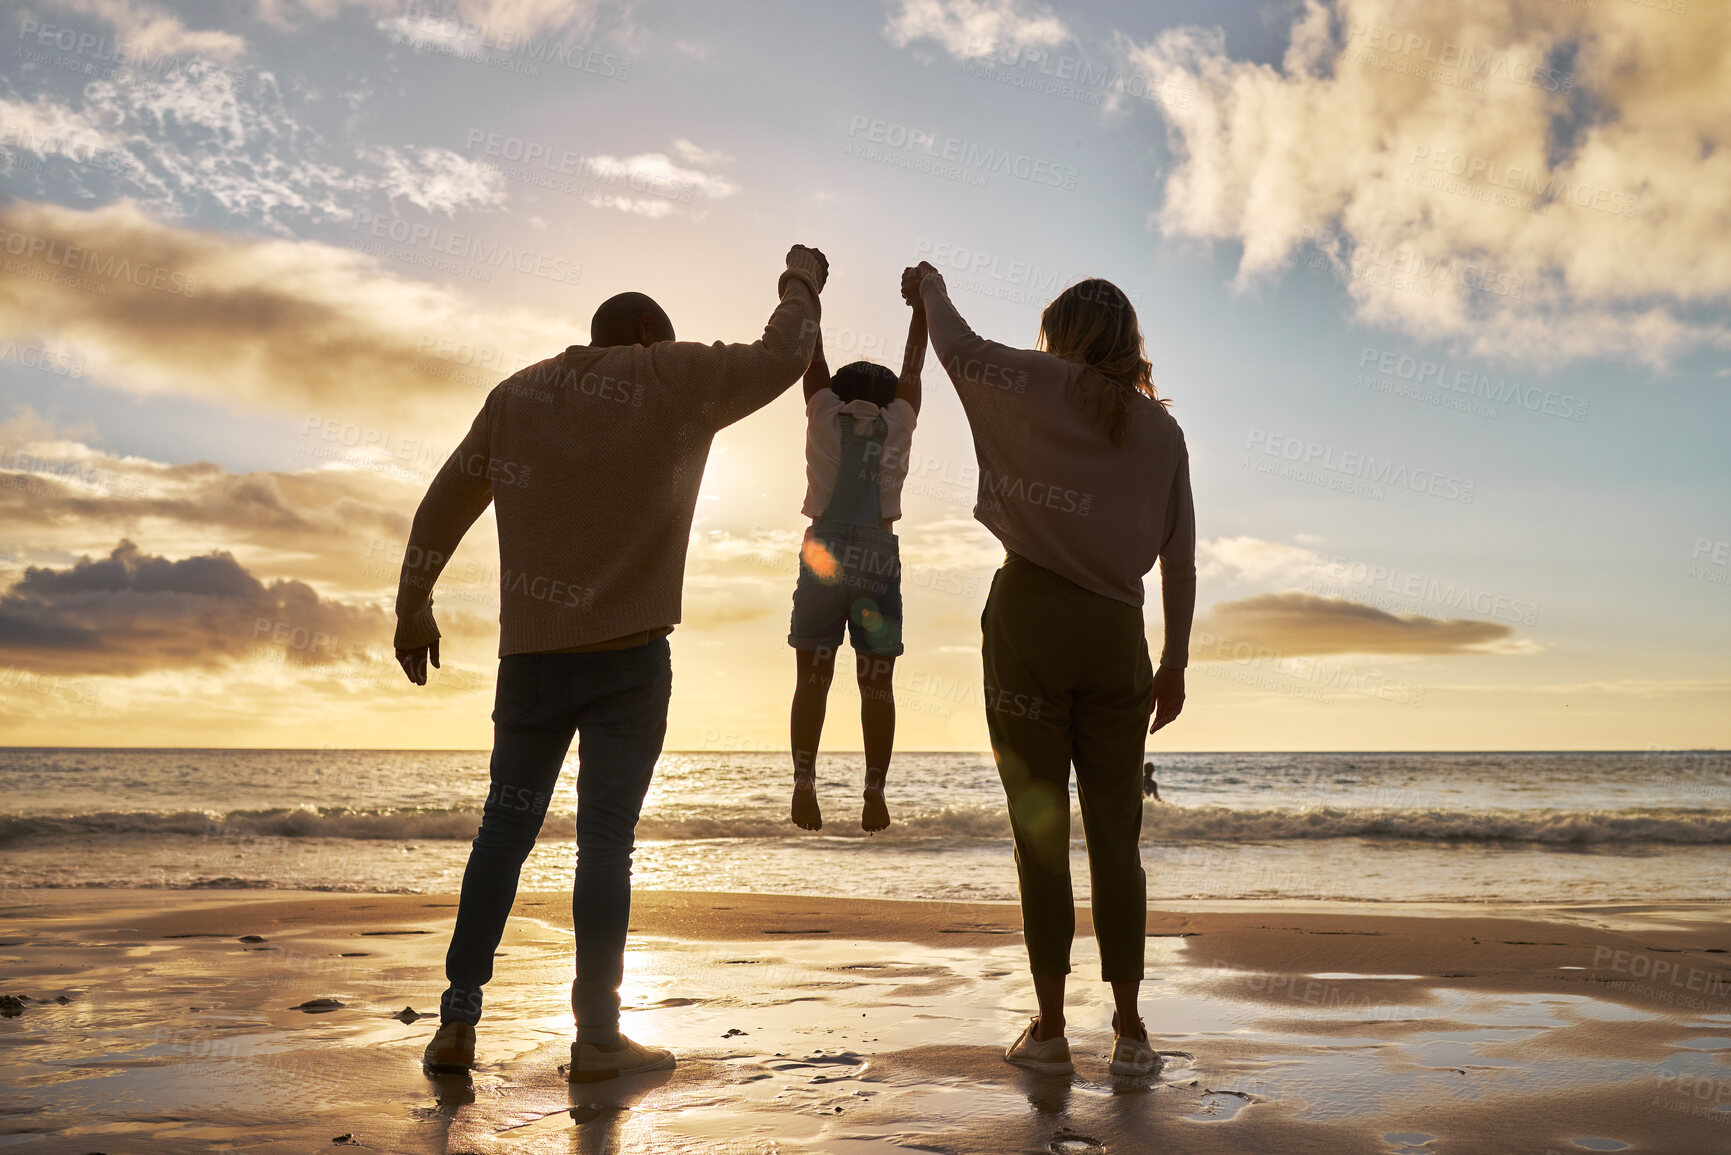 Buy stock photo Family, beach and silhouette with parents and a girl in the air during sunset by the ocean or sea on vacation. Love, water and nature with a mother, father and daughter bonding on a coast holiday